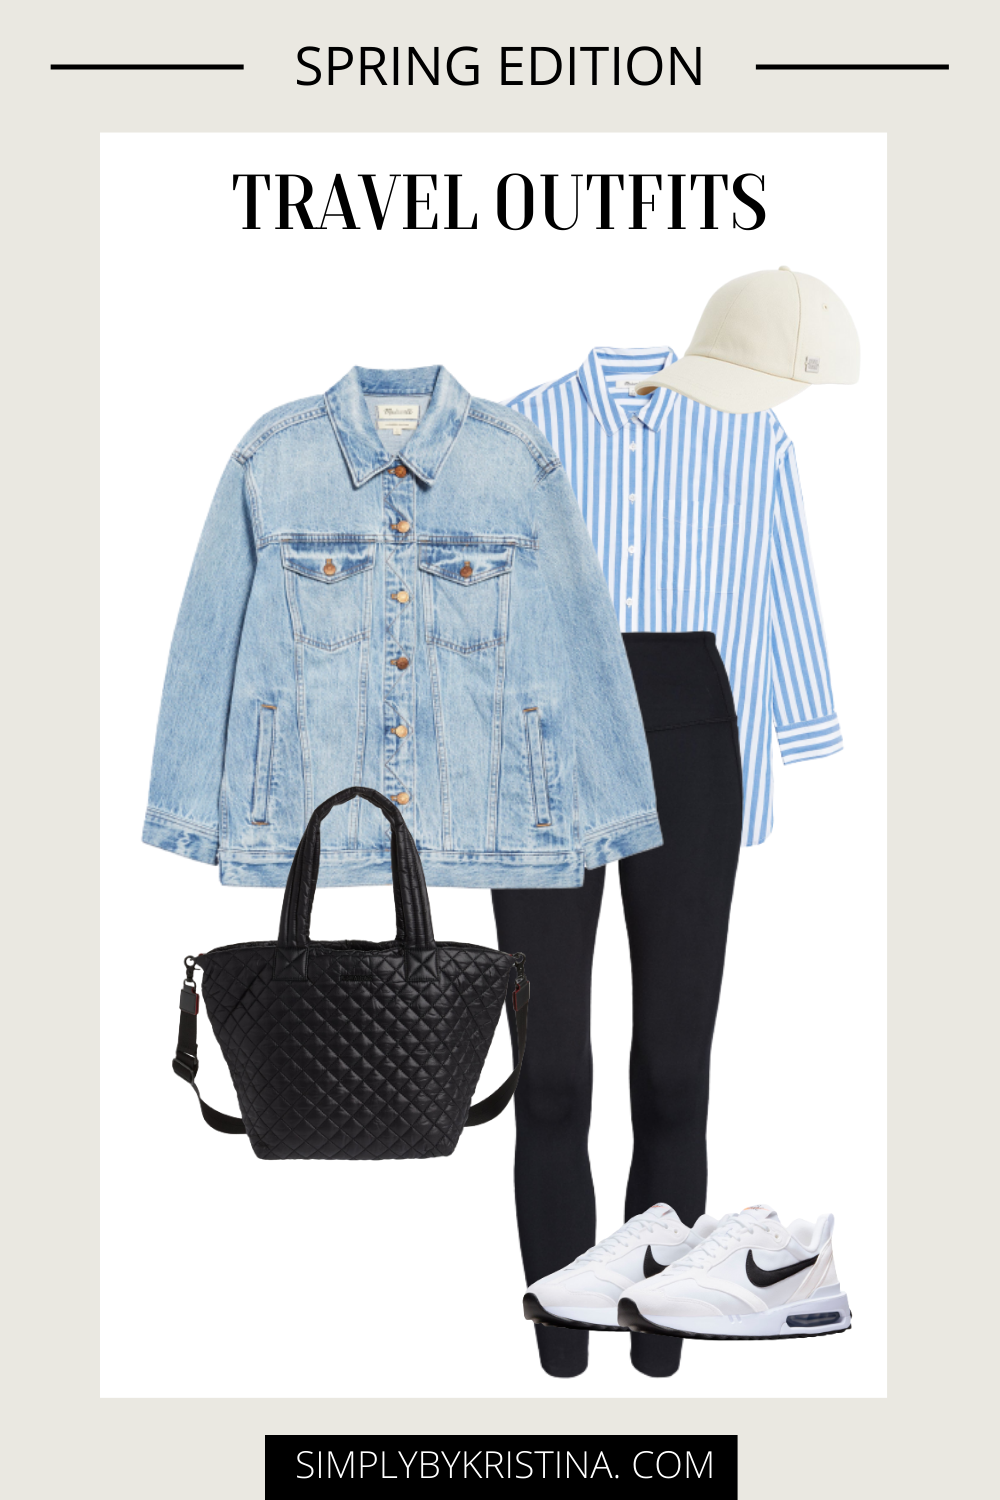 The Best Comfy Airport Outfit Ideas to Wear on Your Next Flight!